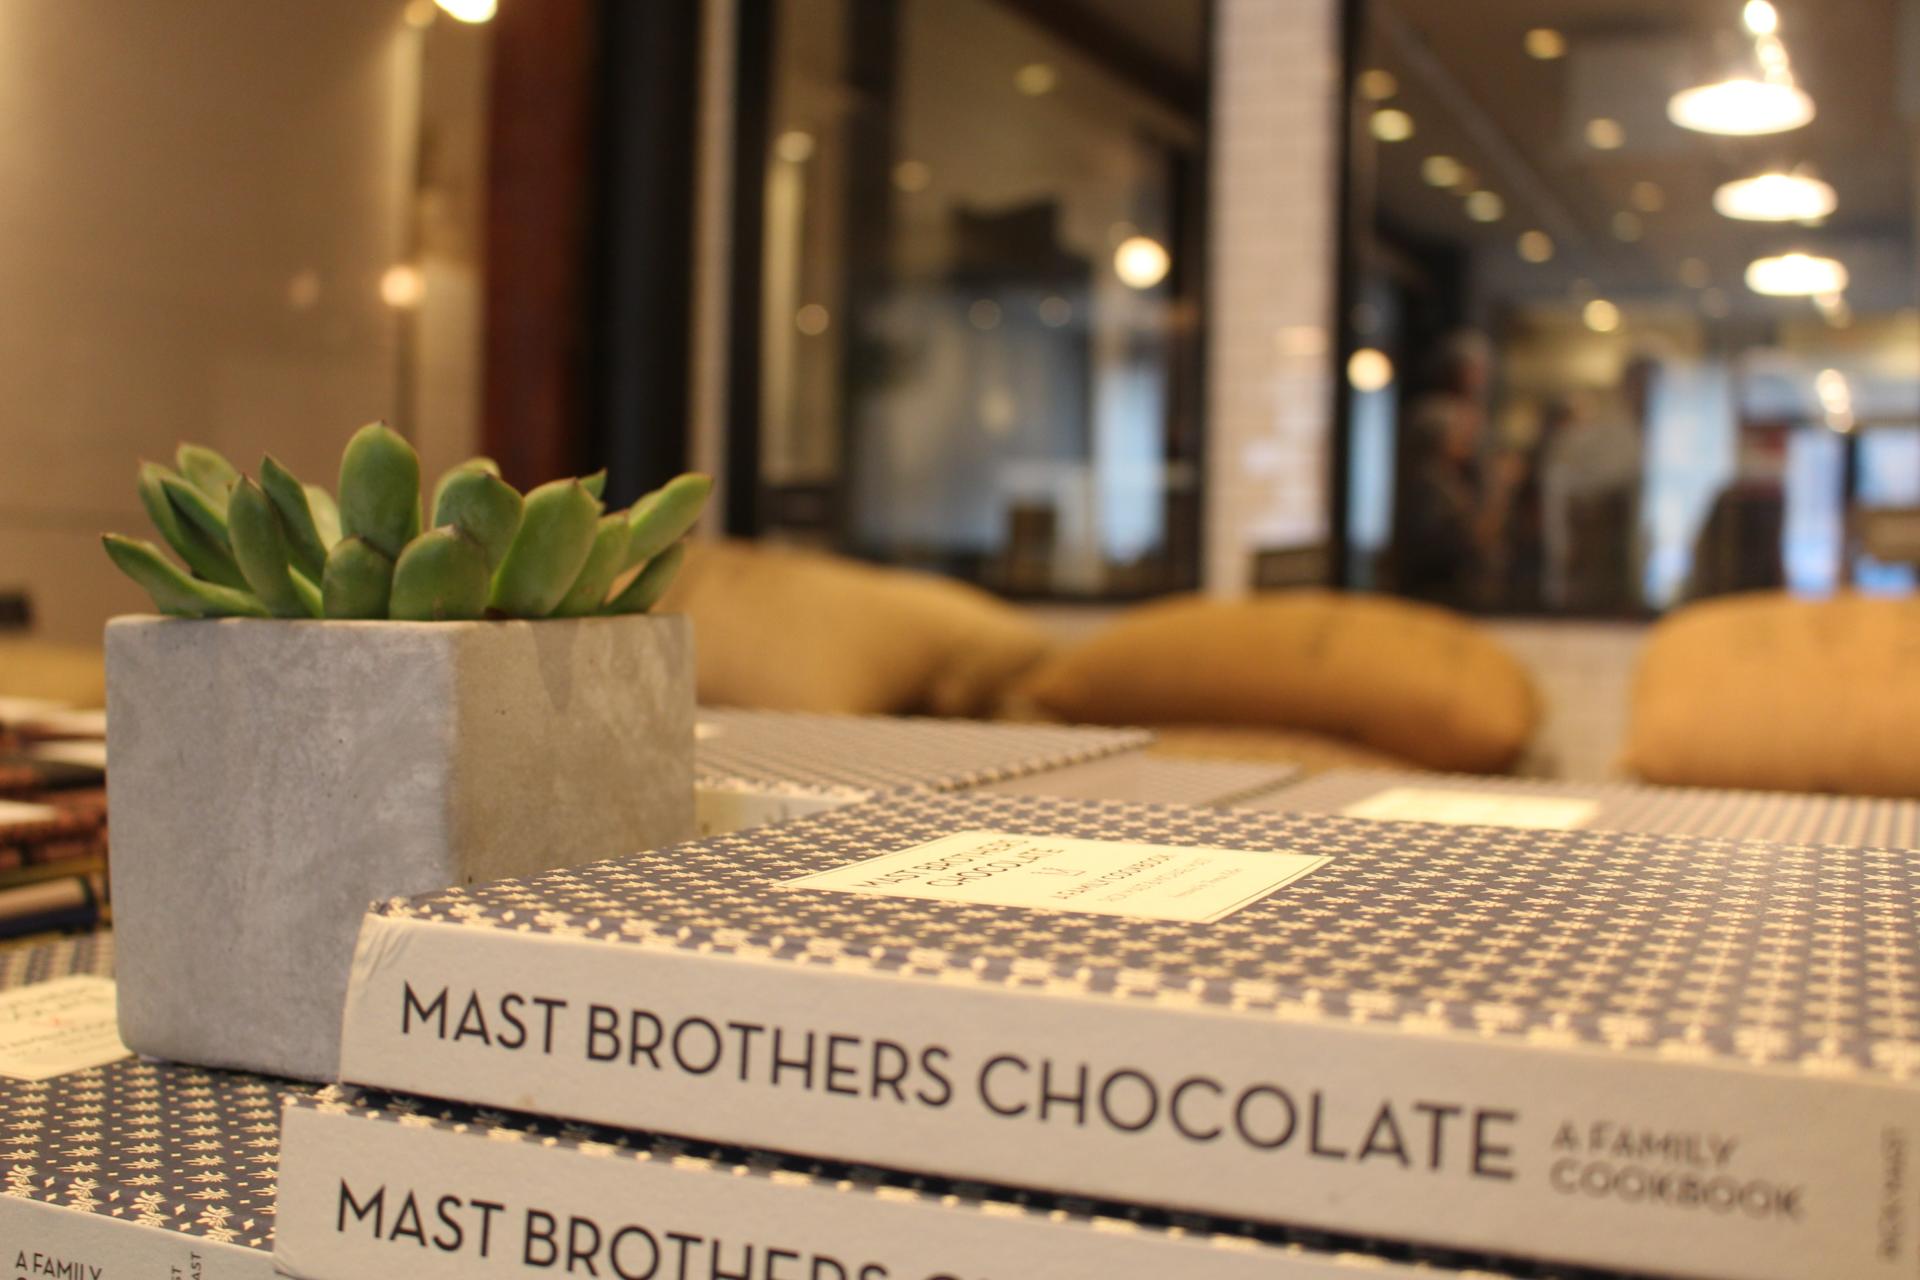 LOCAL: A Mast Brothers Chocolate Shop Grows In Brooklyn